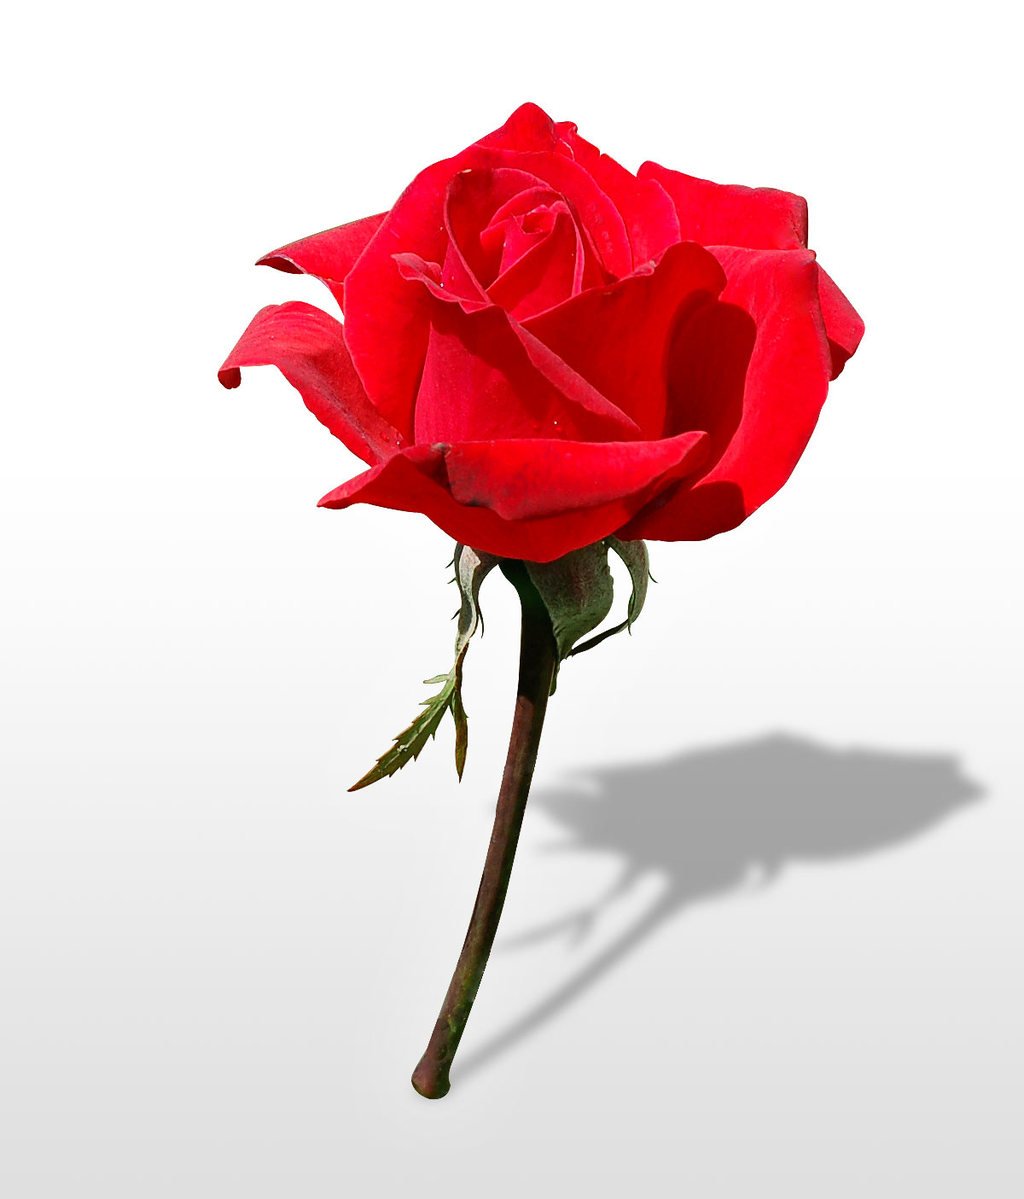 the shadow of a single red rose flower on a white background